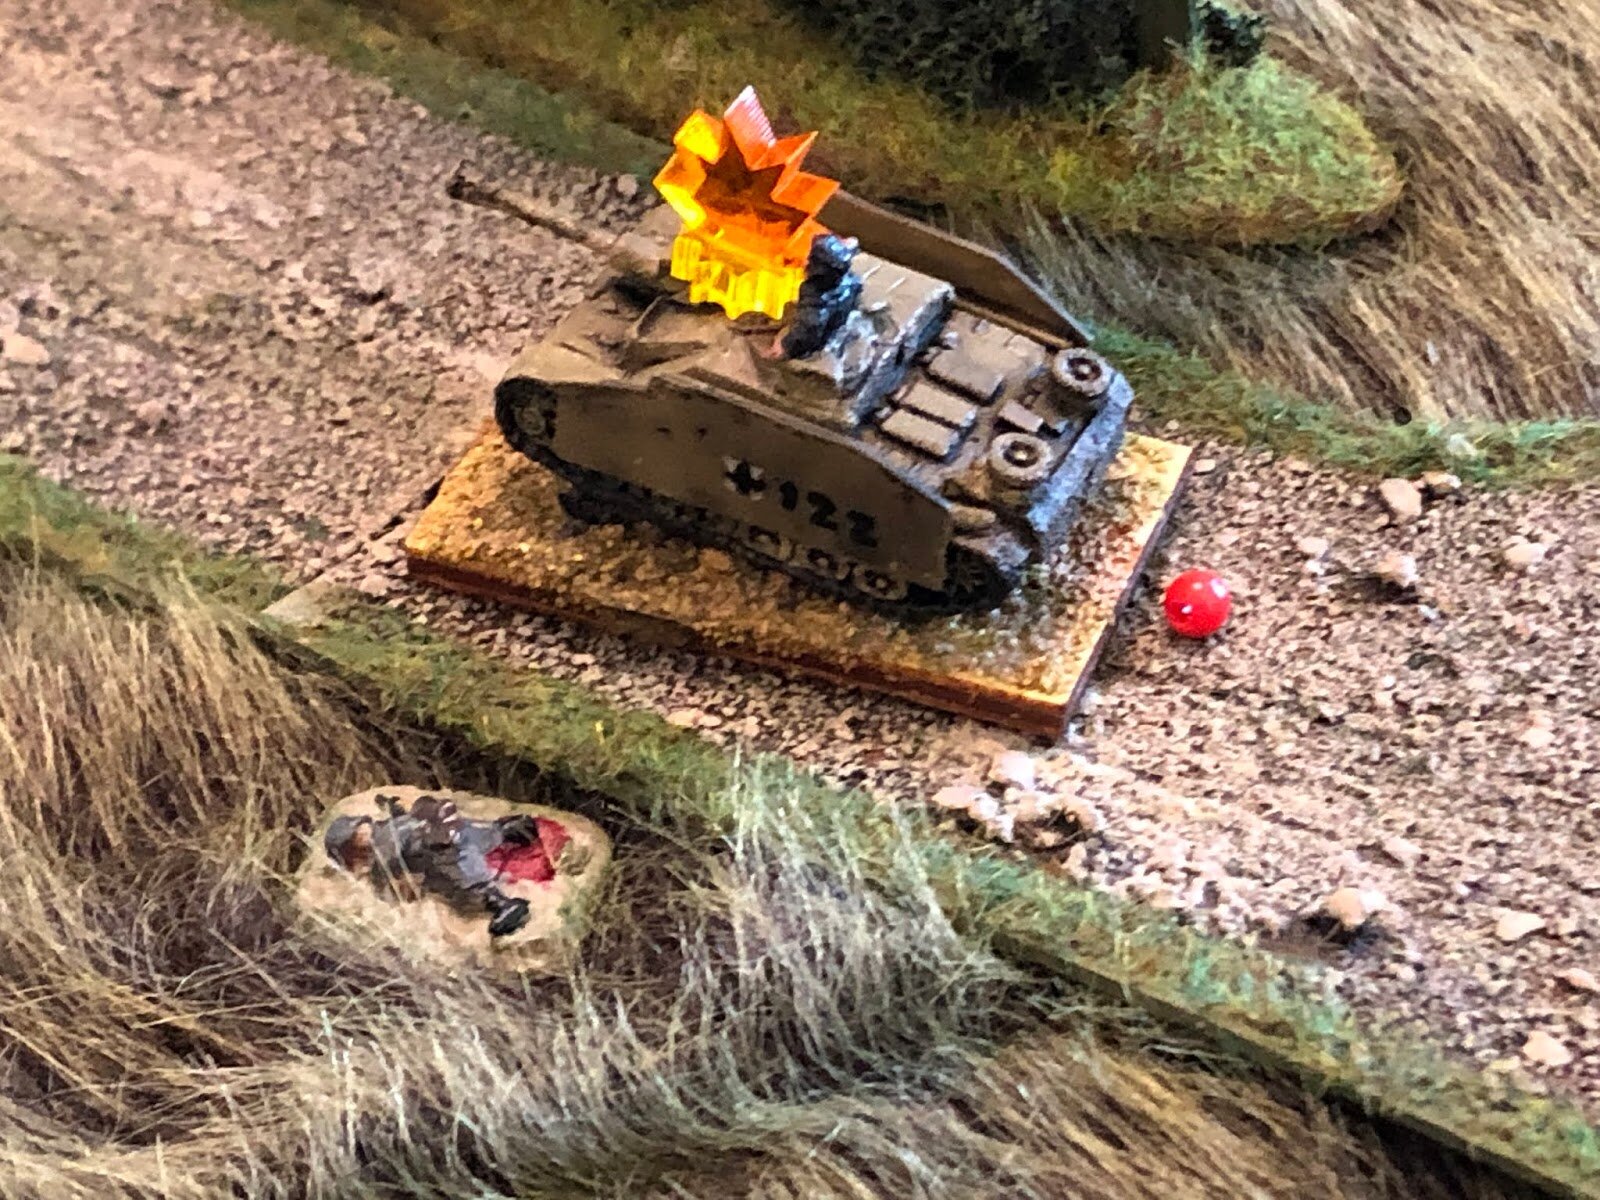 And they kill the German Stug Platoon commander!  His body falls out of the hatch and onto the ground beside the vehicle, the crew panicked!